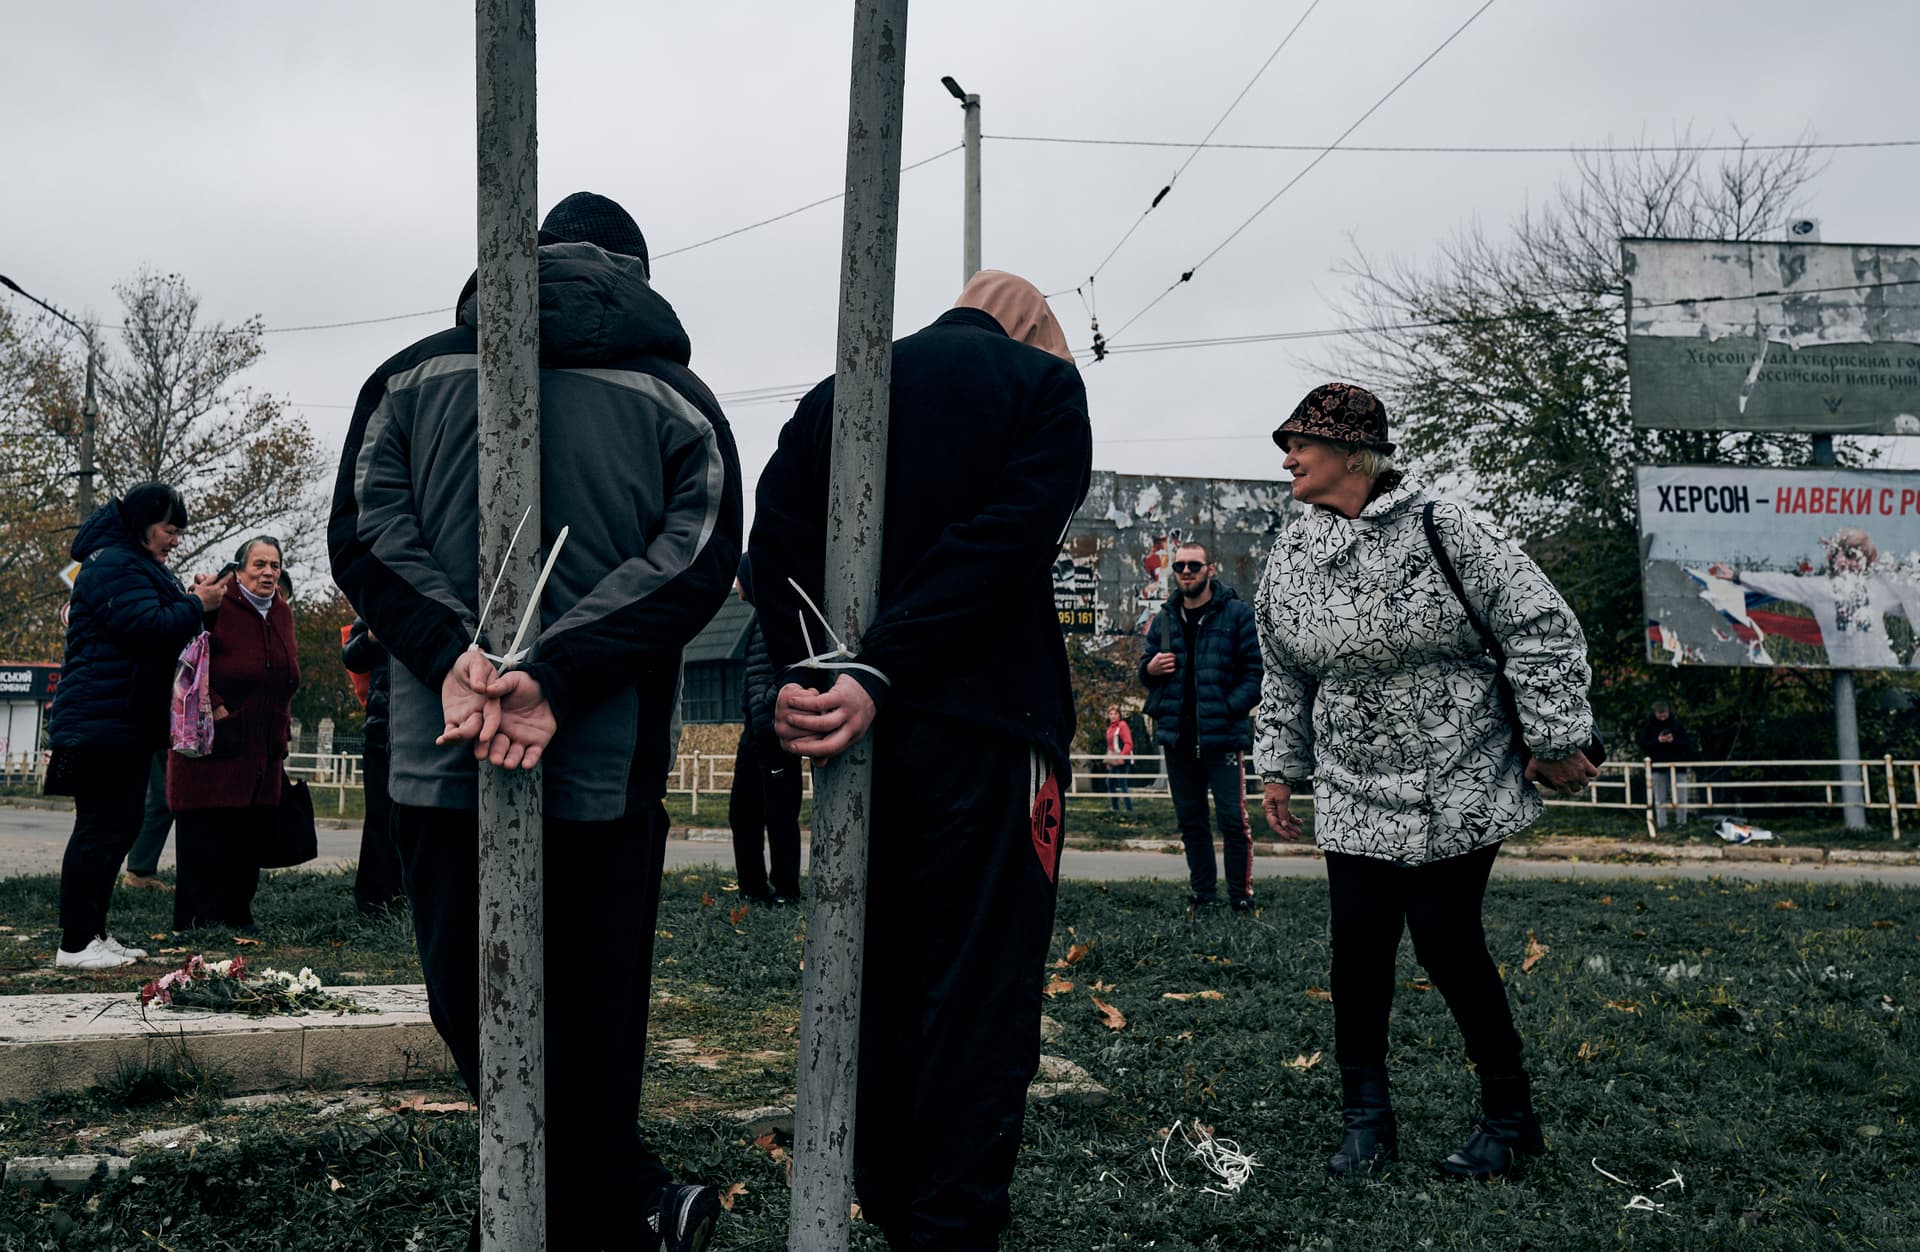 Local residents look at two alleged collaborators tied by the hands to pillars in Kherson